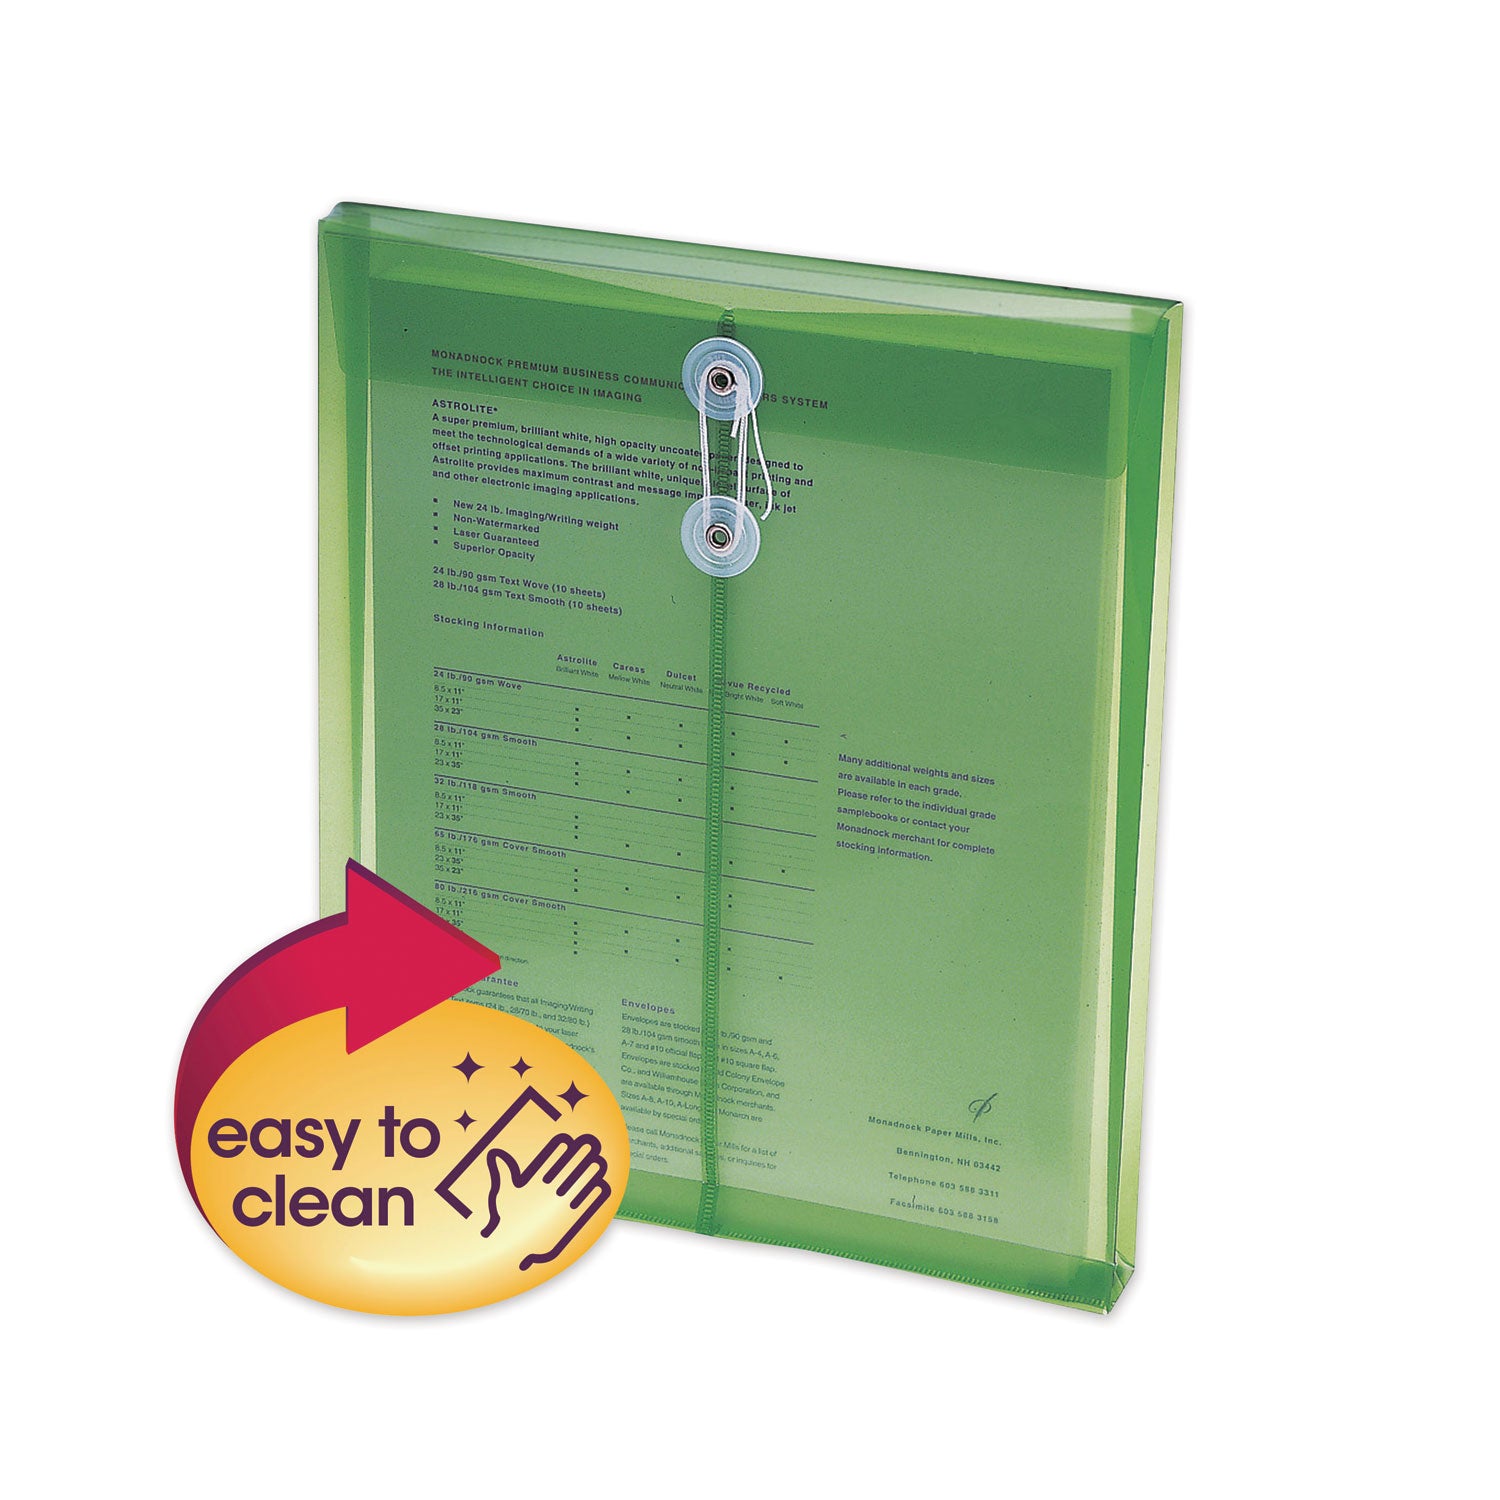 Poly String and Button Interoffice Envelopes, Open-End (Vertical), 9.75 x 11.63, Transparent Green, 5/Pack - 